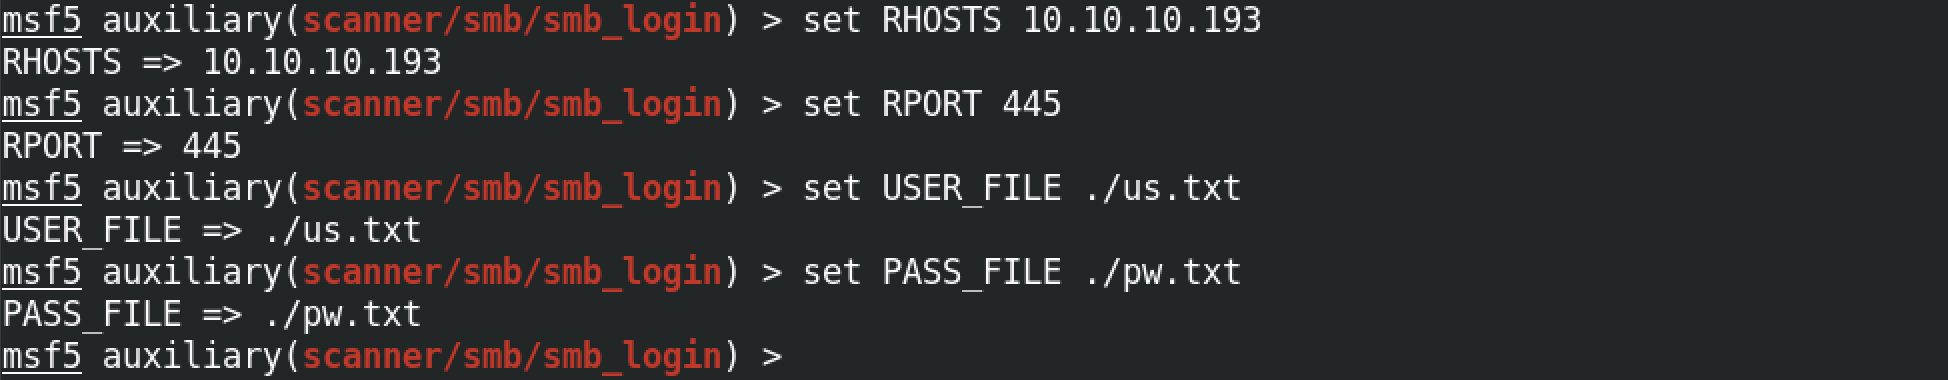 Setting the RHOSTS, RPORT, USER_FILE and PASS_FILE options.